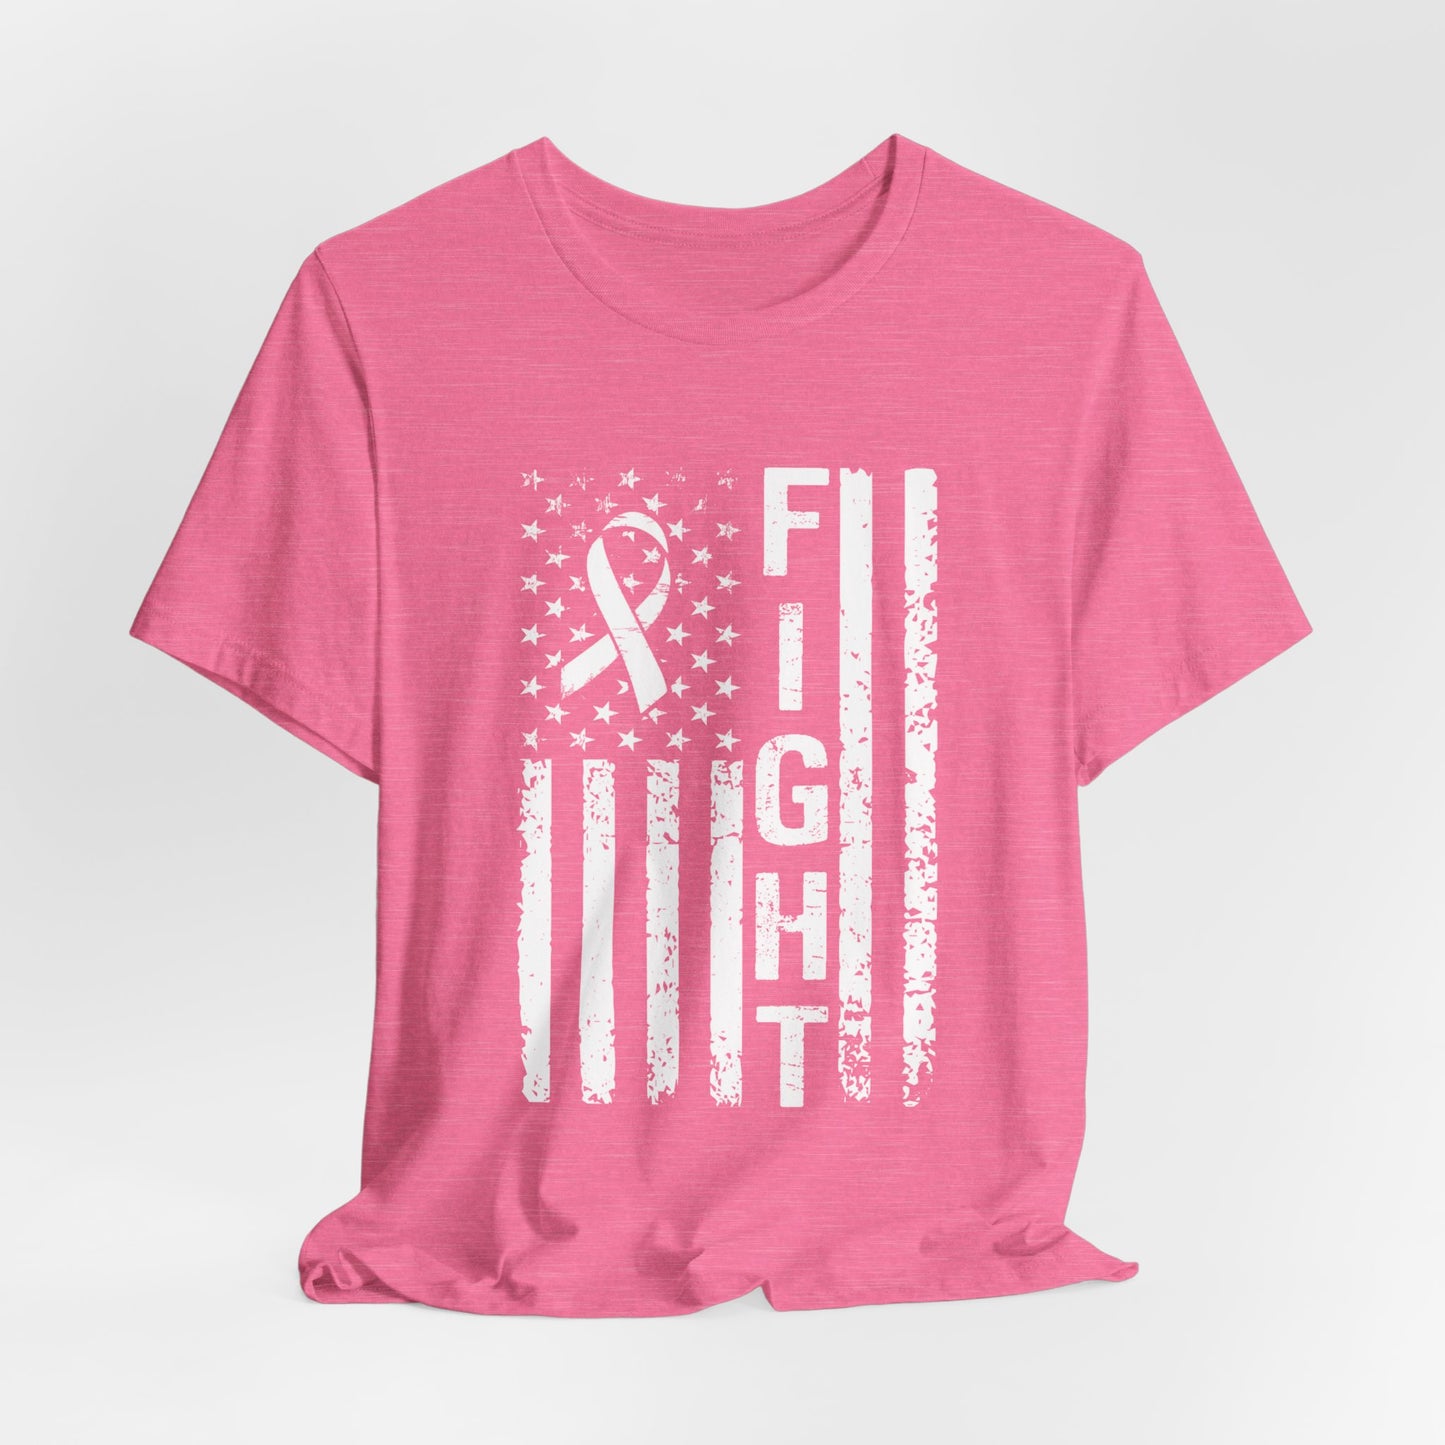 Cancer Fight Warrior Advocacy Support American Flag Adult Unisex Tshirt